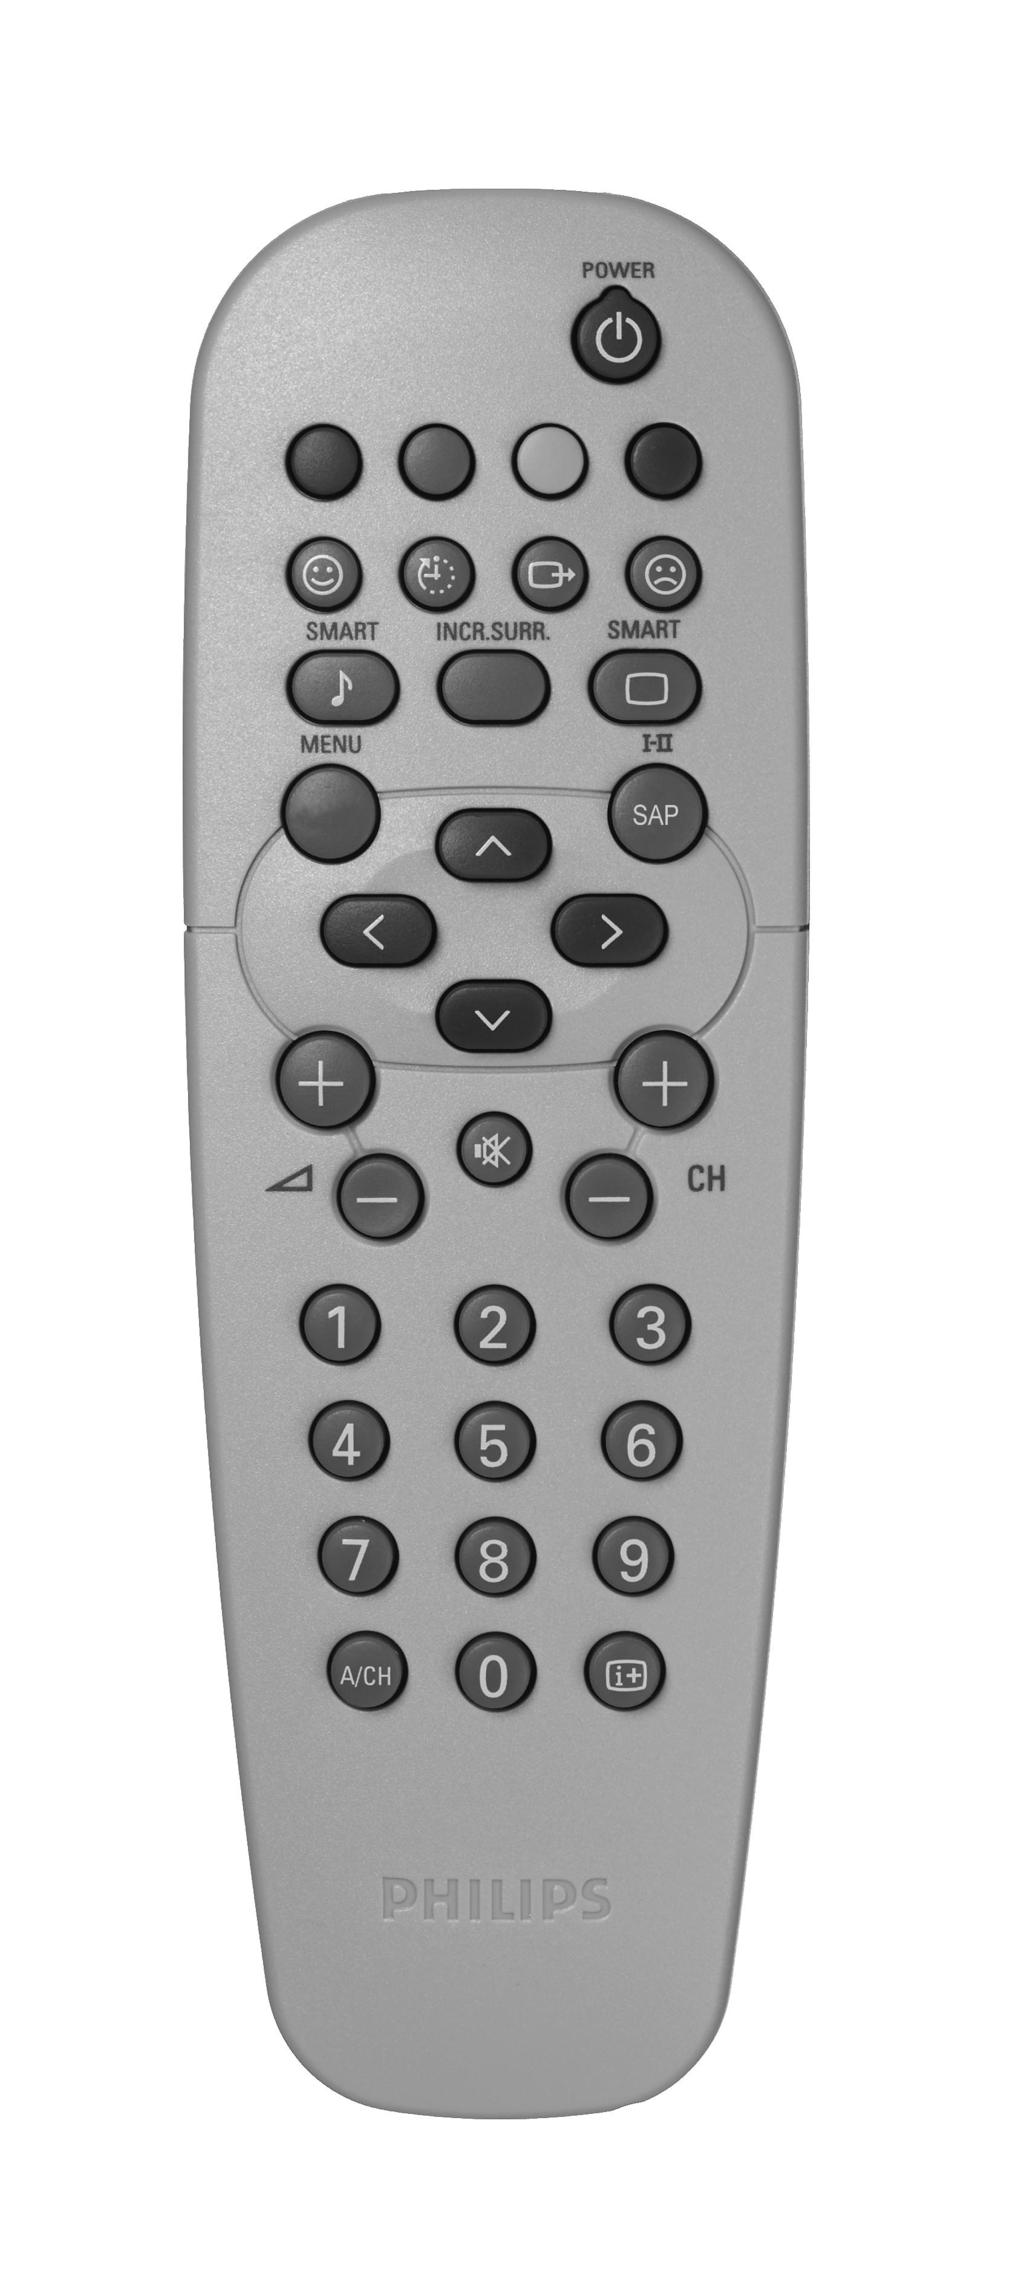 Remote control keys (Choose the right remote control that comes with your TV) Personal Zapping You can surf up to 10 personal channels for each key (p.